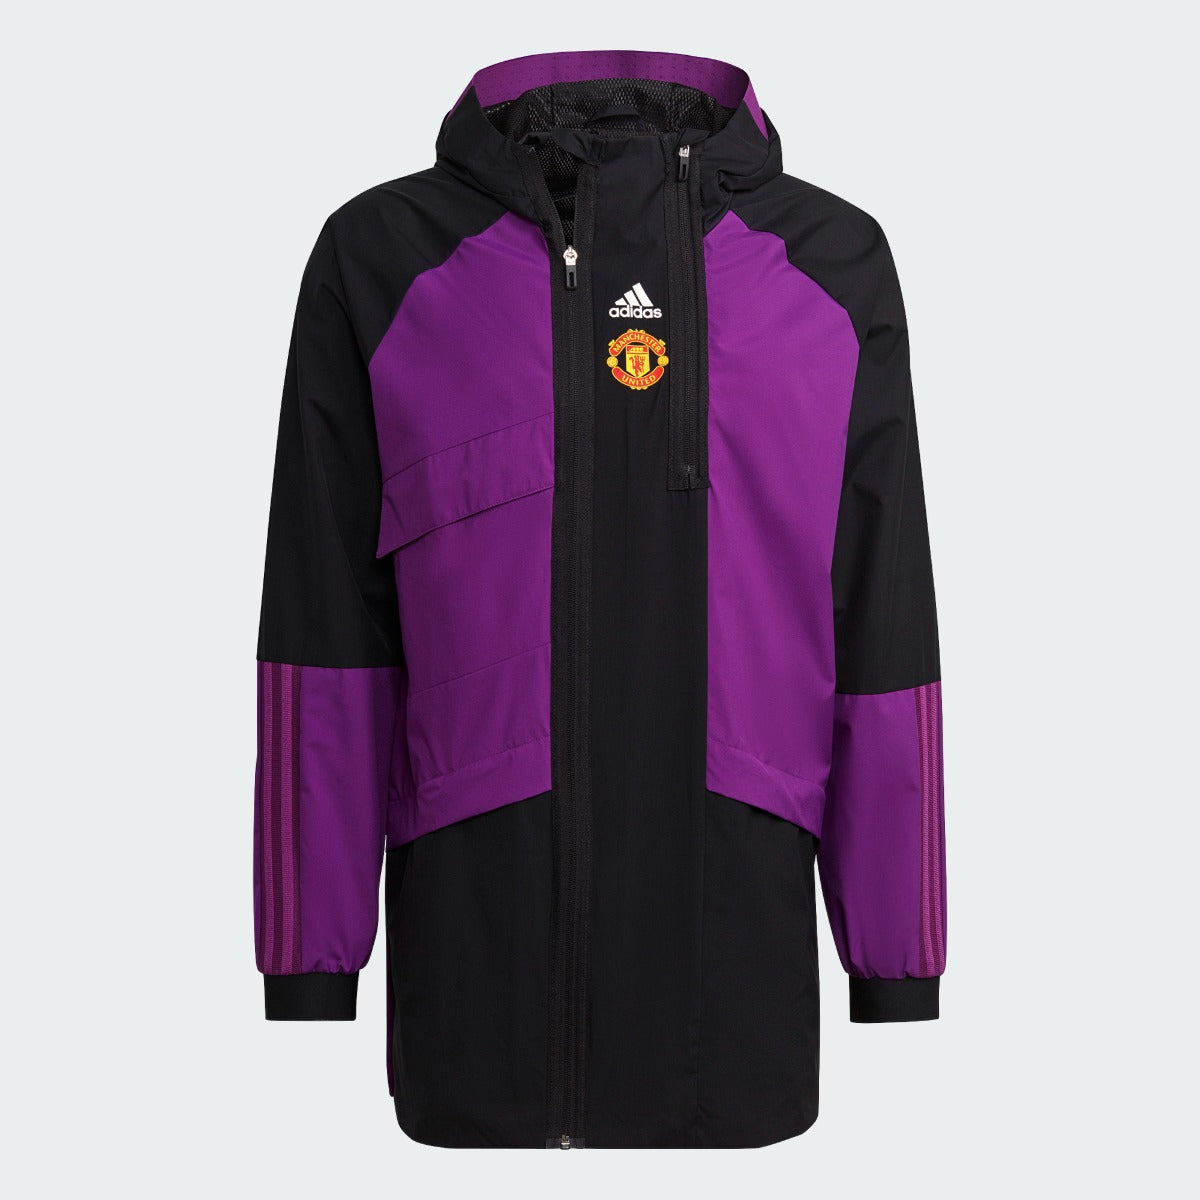 Adidas 2021-22 Manchester United Travel Drill Jacket - Black-Purple (Front)